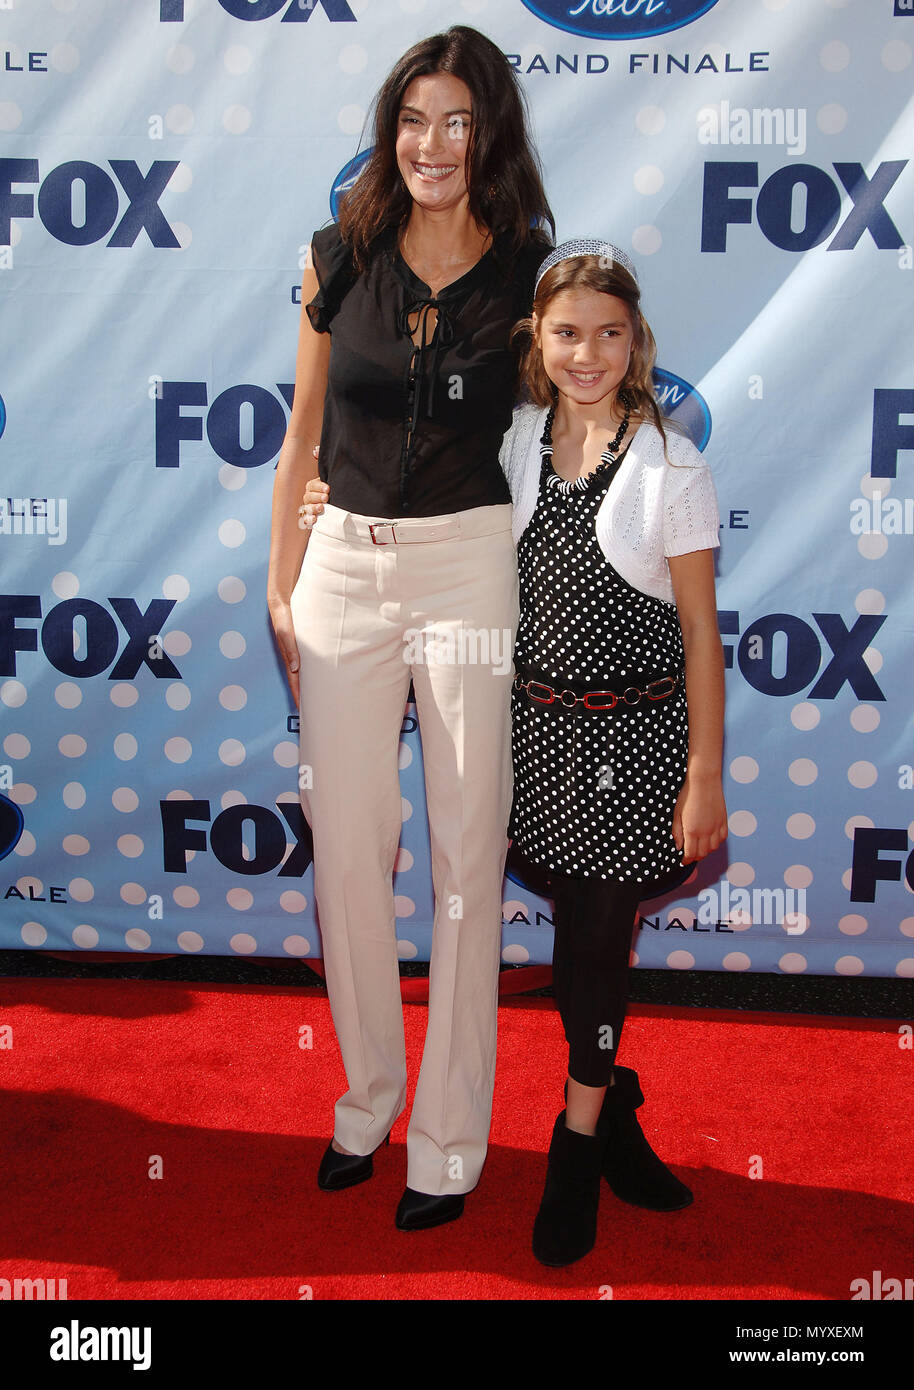 morgenmad længde bar Teri Hatcher and daughter arriving at the AMERICAN IDOL Grand Final at the  Kodak Theatre In Los Angeles. full length smile HatcherTeri daughter 253  Event in Hollywood Life - California, Red Carpet